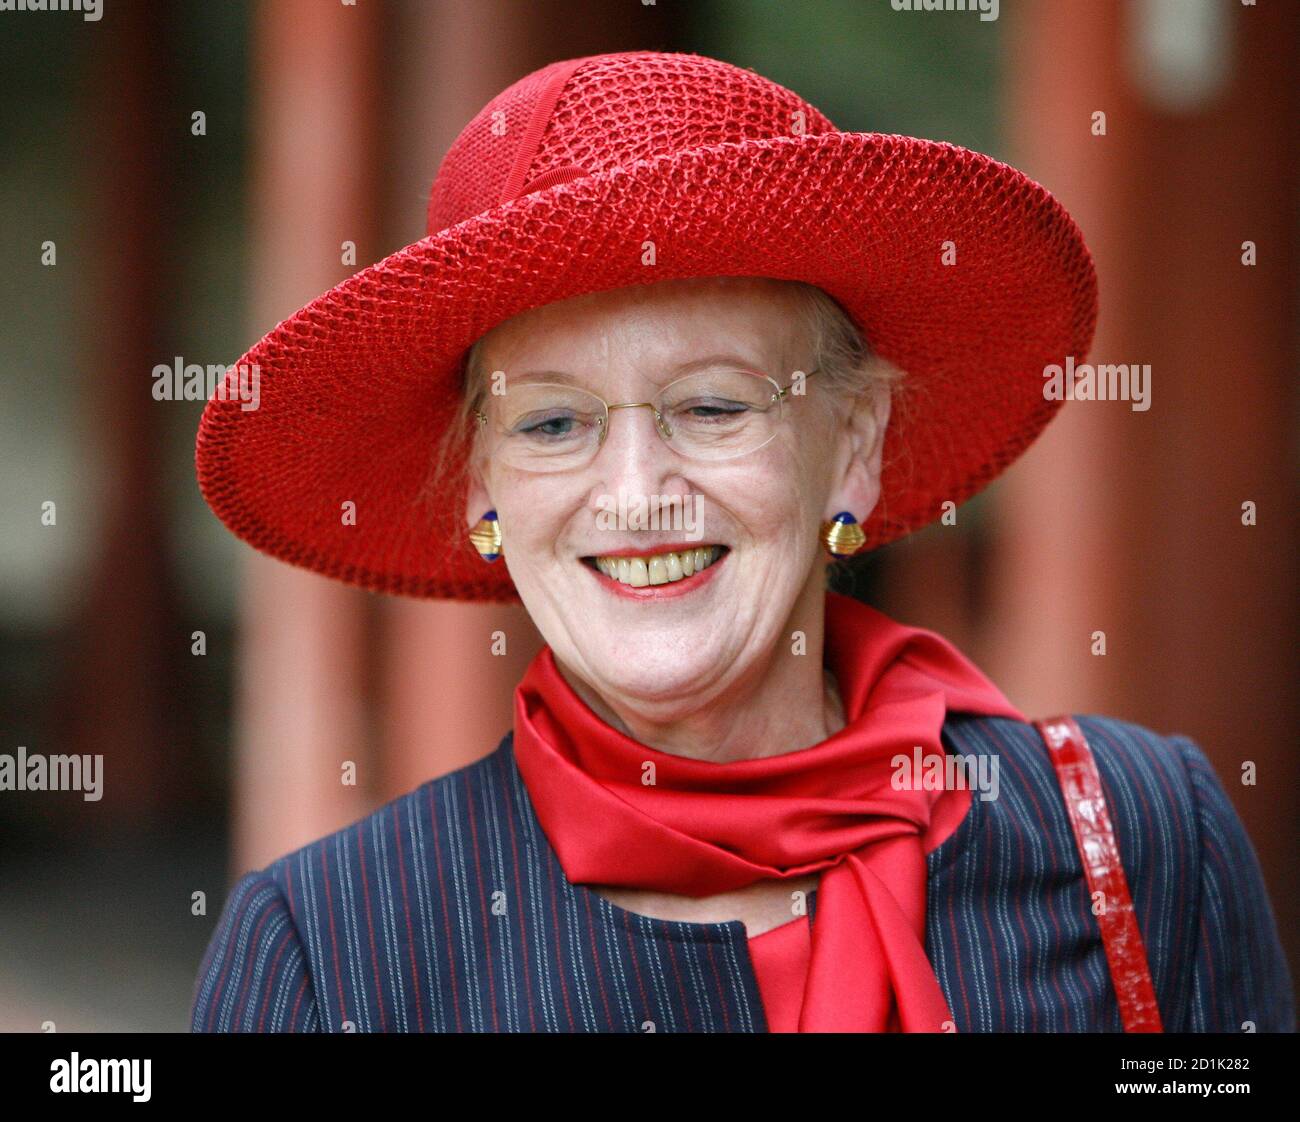 Denmark's Queen Margrethe II visits the Biwon garden in the Changdeokgung palace in Seoul October 10, 2007. REUTERS/Lee Jae-Won (SOUTH KOREA) Stock Photo